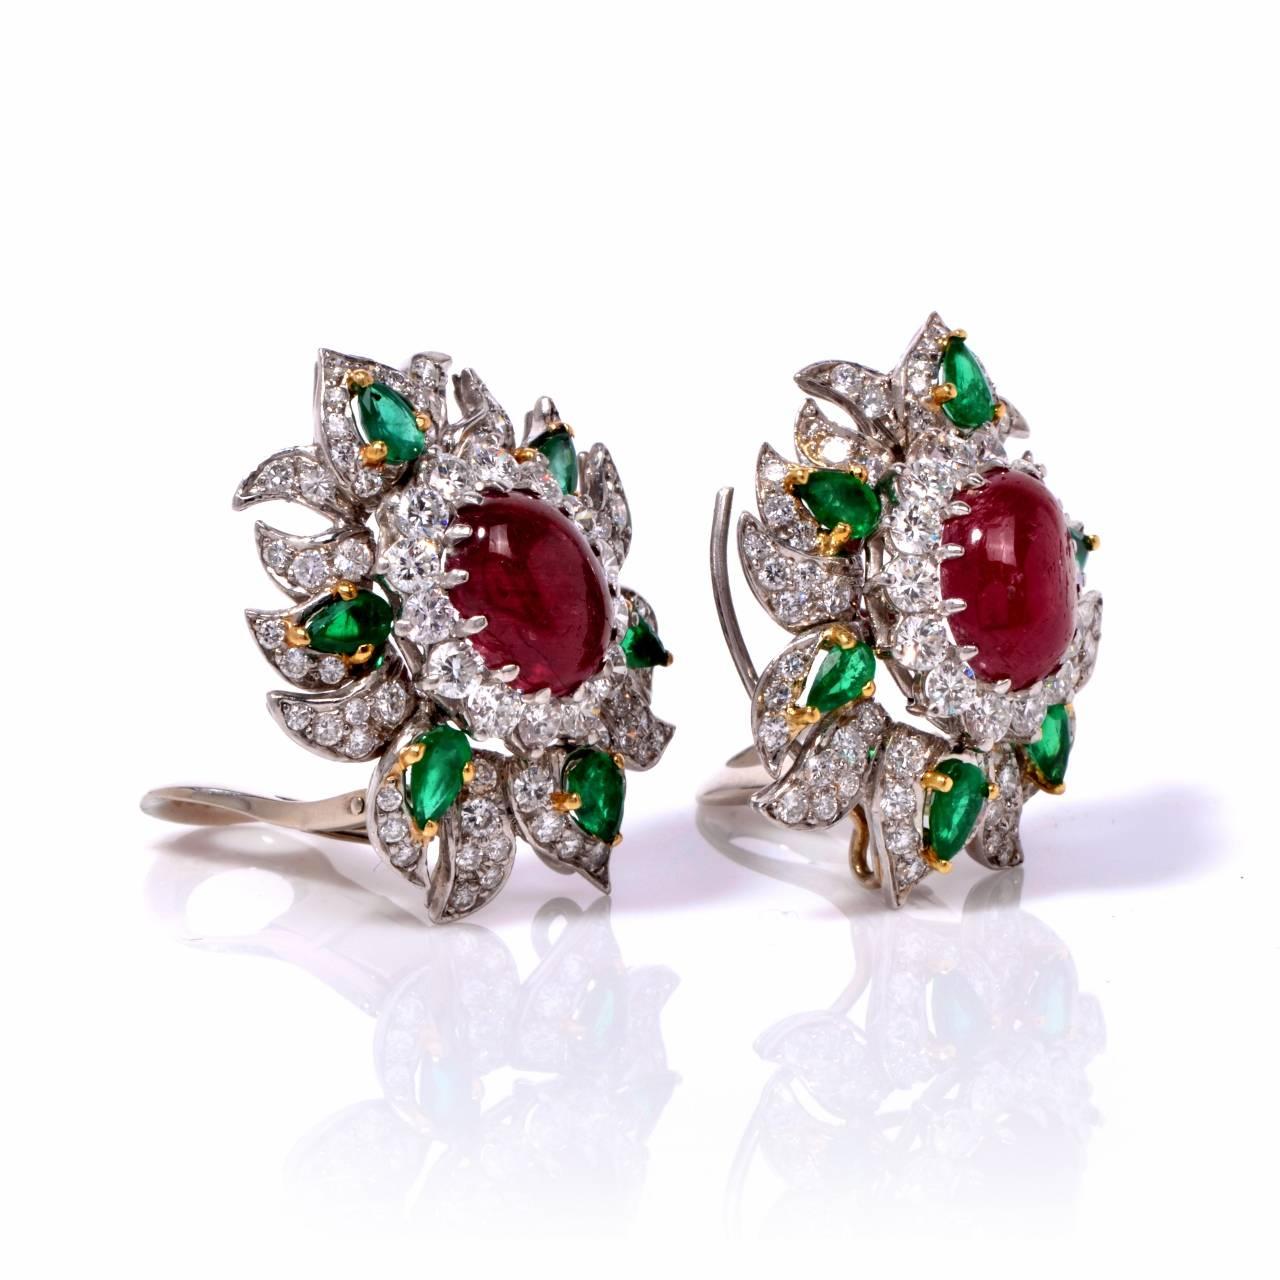 These vintage circa 1960's earrings are perfect for a night to remember, full of sparkle and the epitome of luxury, they will surely get you noticed! Finely crafted in solid platinum, they feature 2 genuine cabochon rubies approx. 6.00ct. The deep